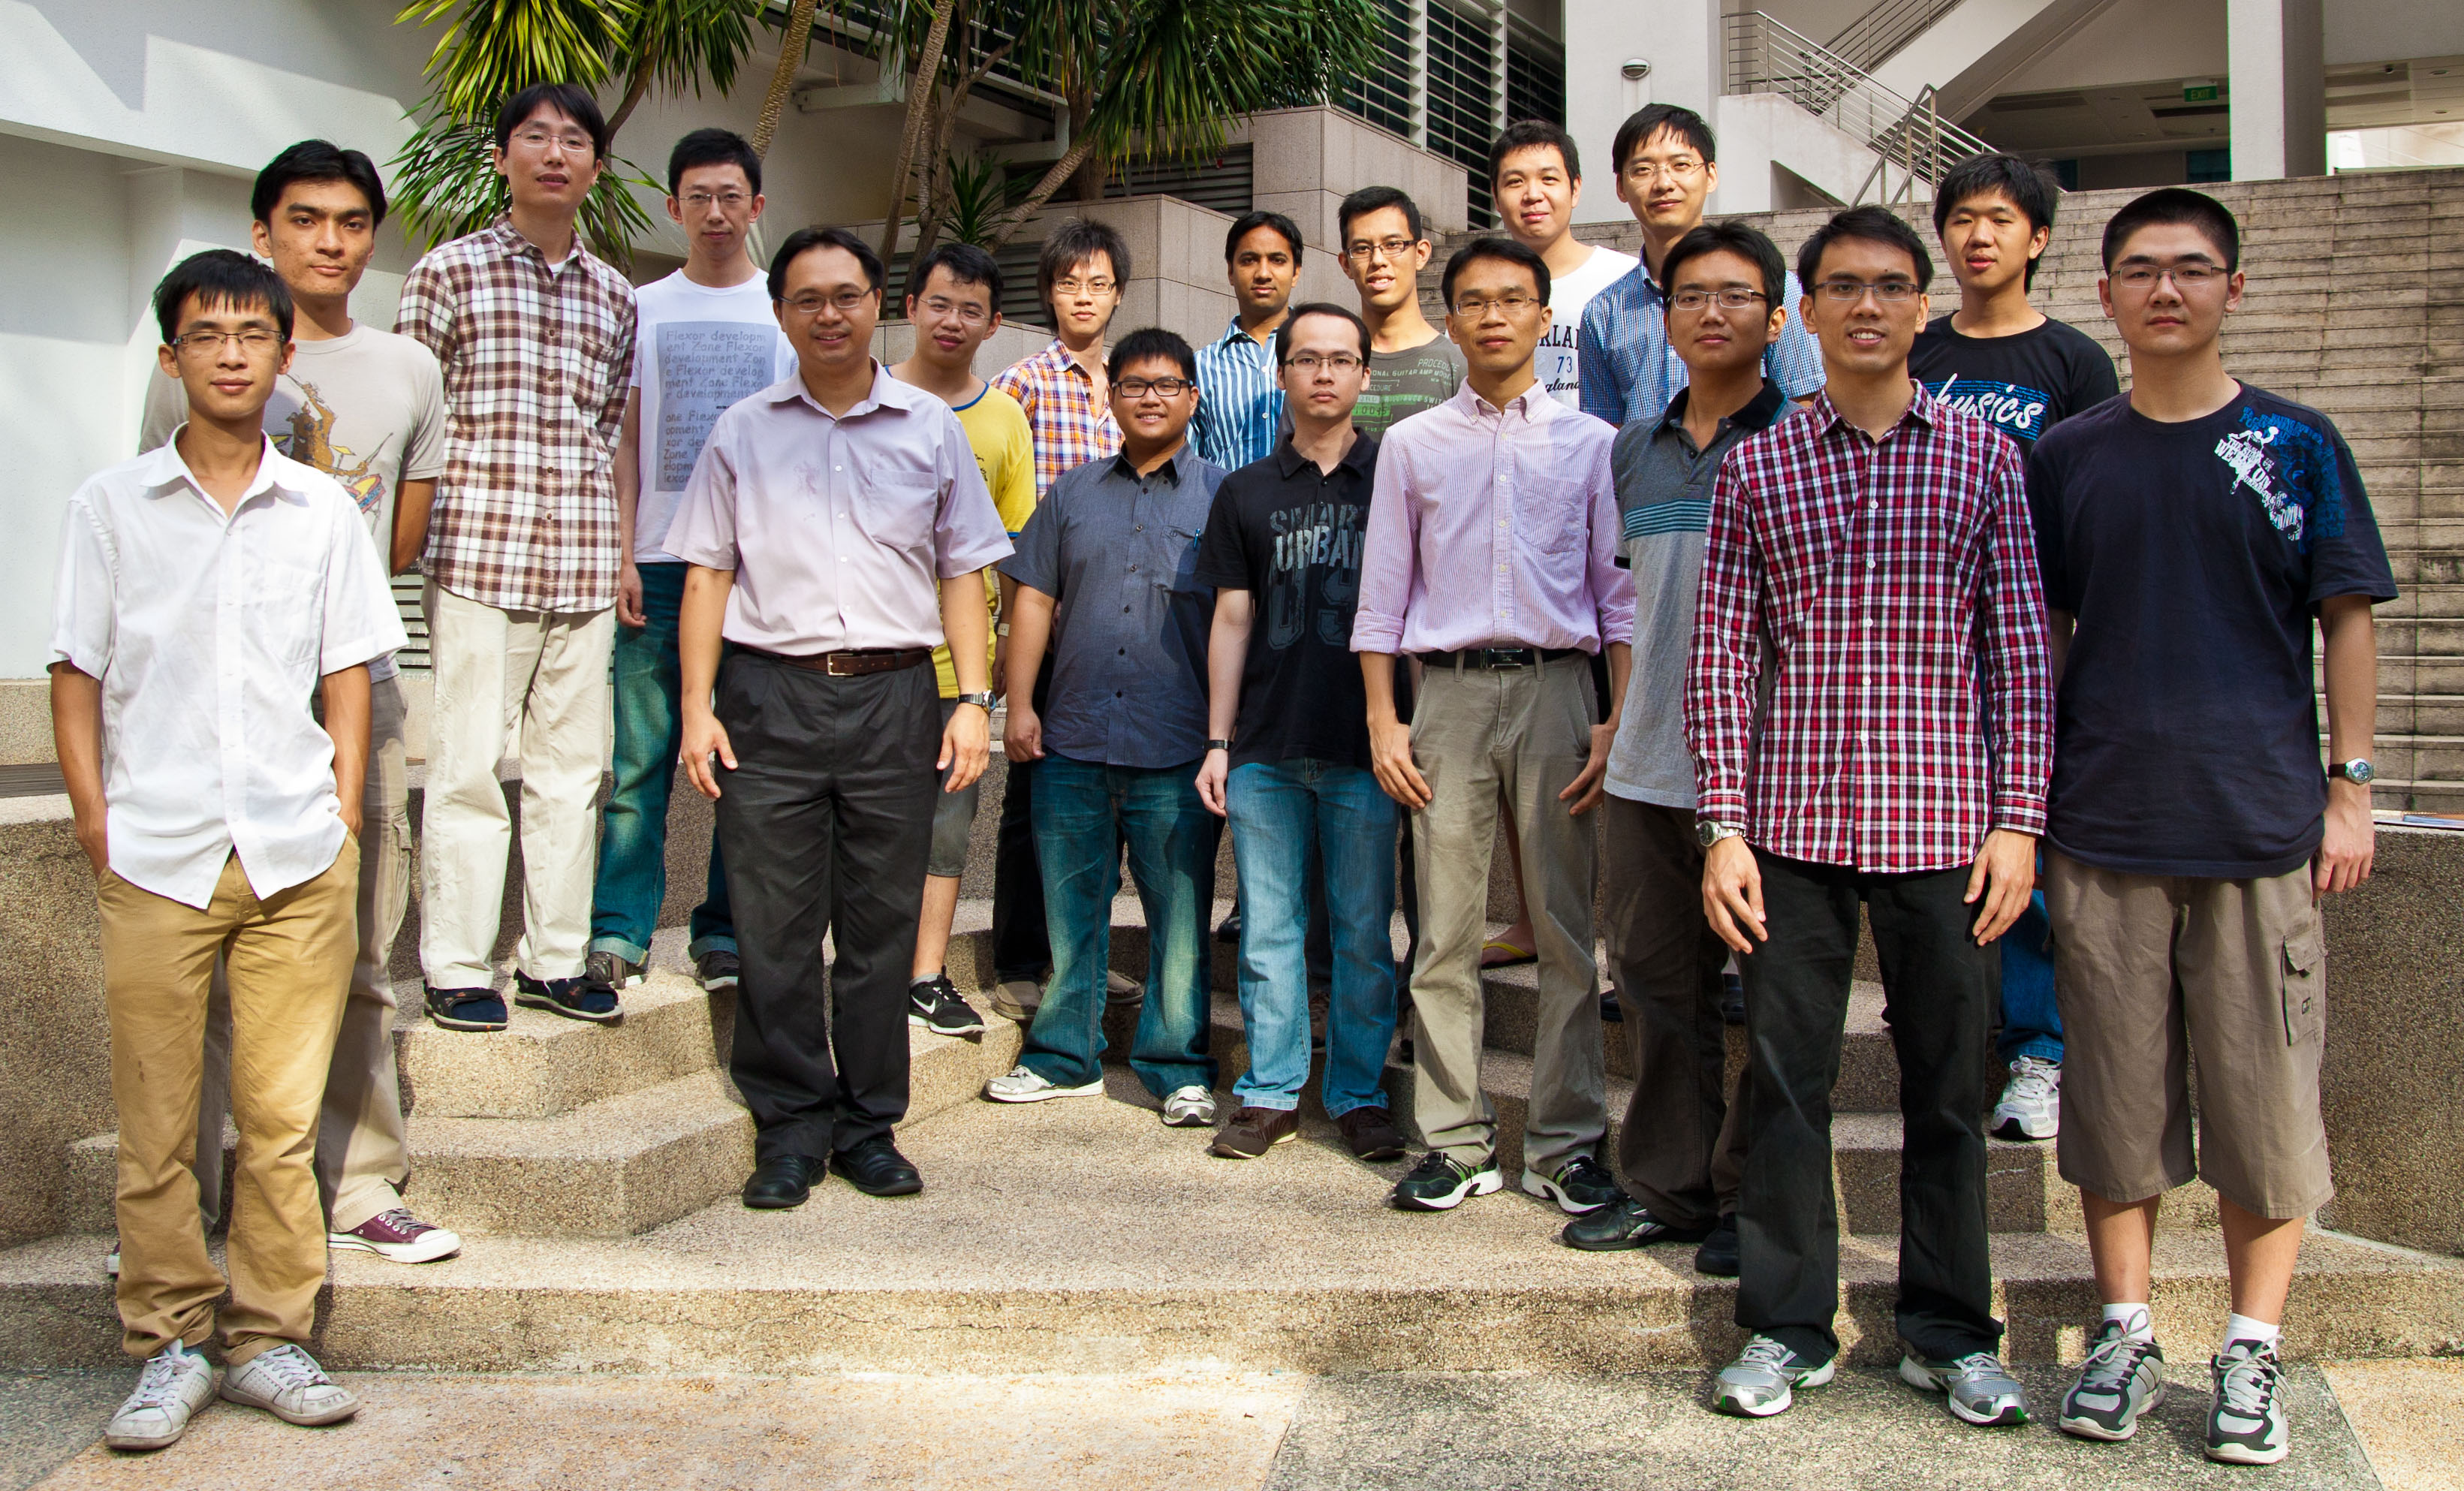 Photo of research group members taken in August 2012